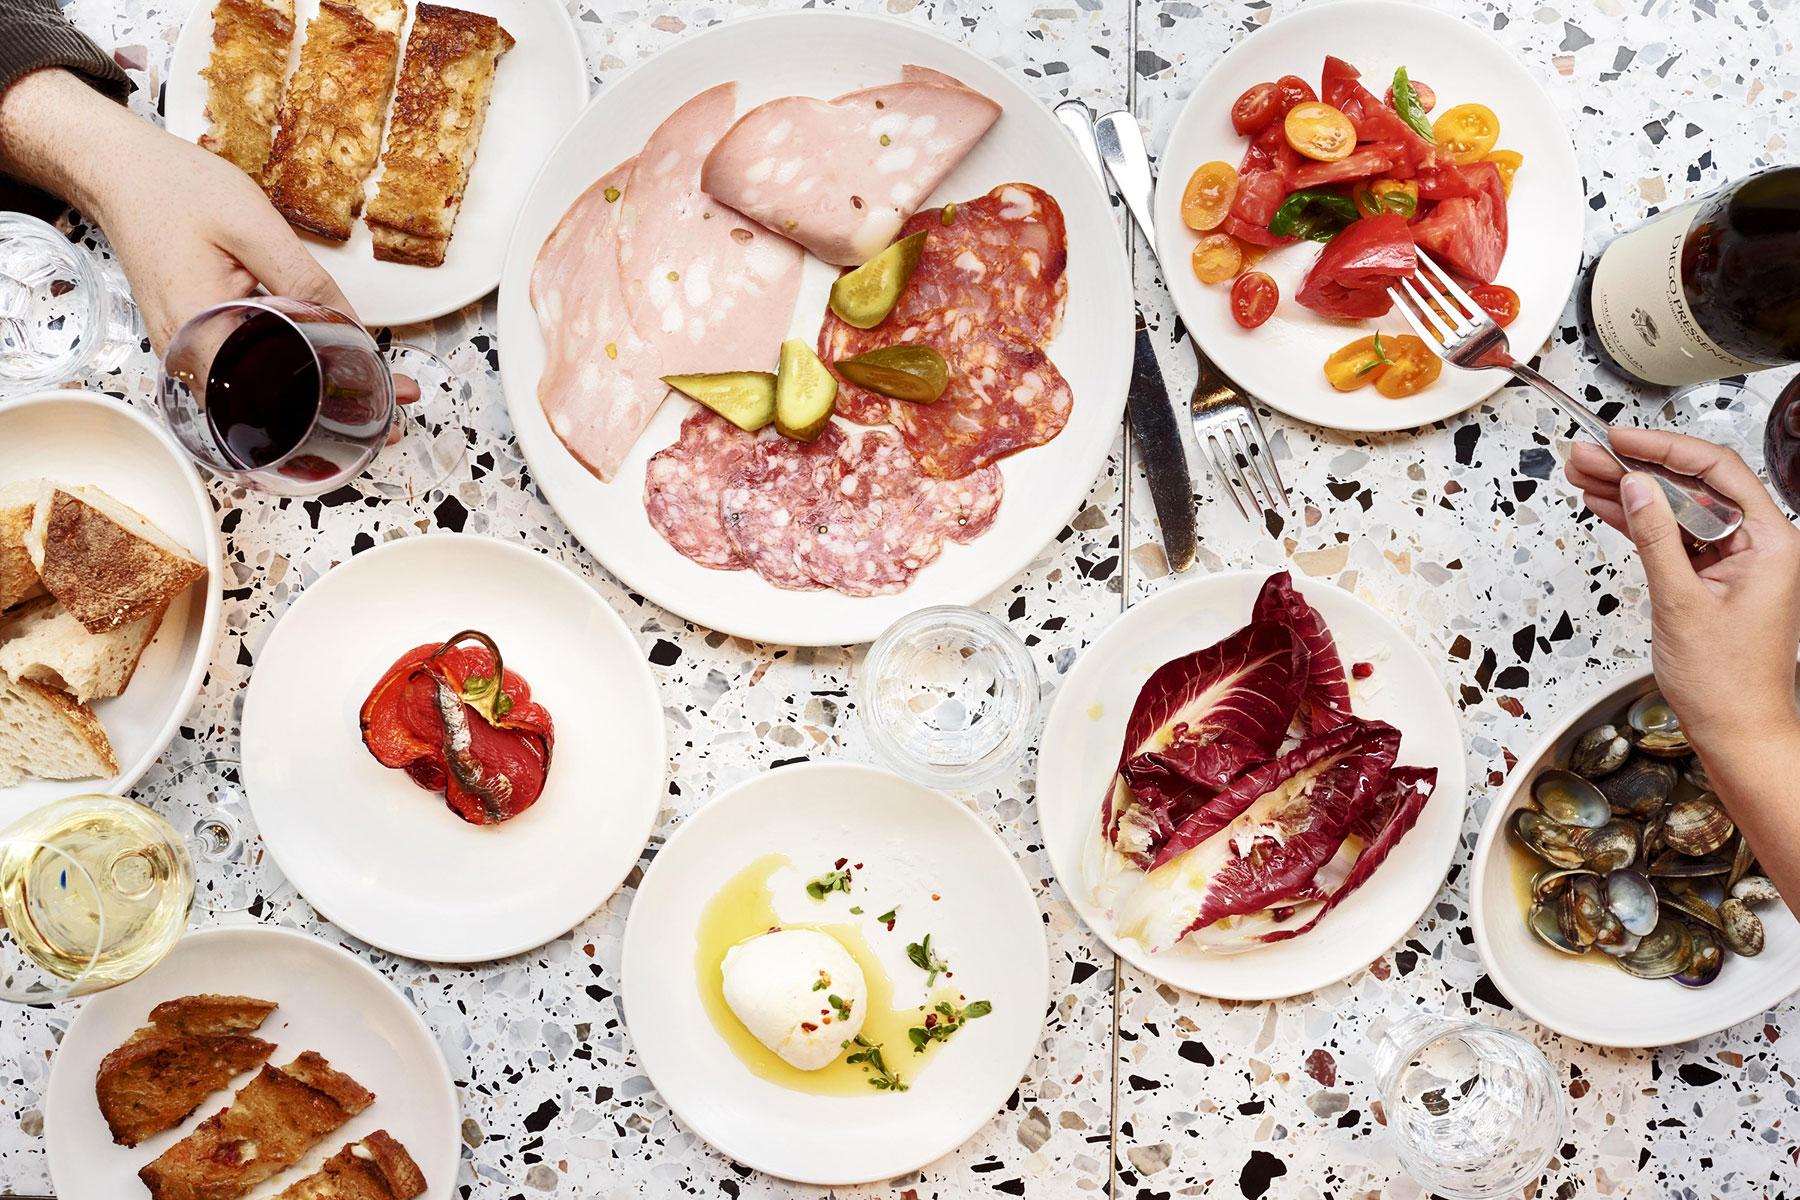 15 London Restaurants With Long Lines And Where To Eat Instead